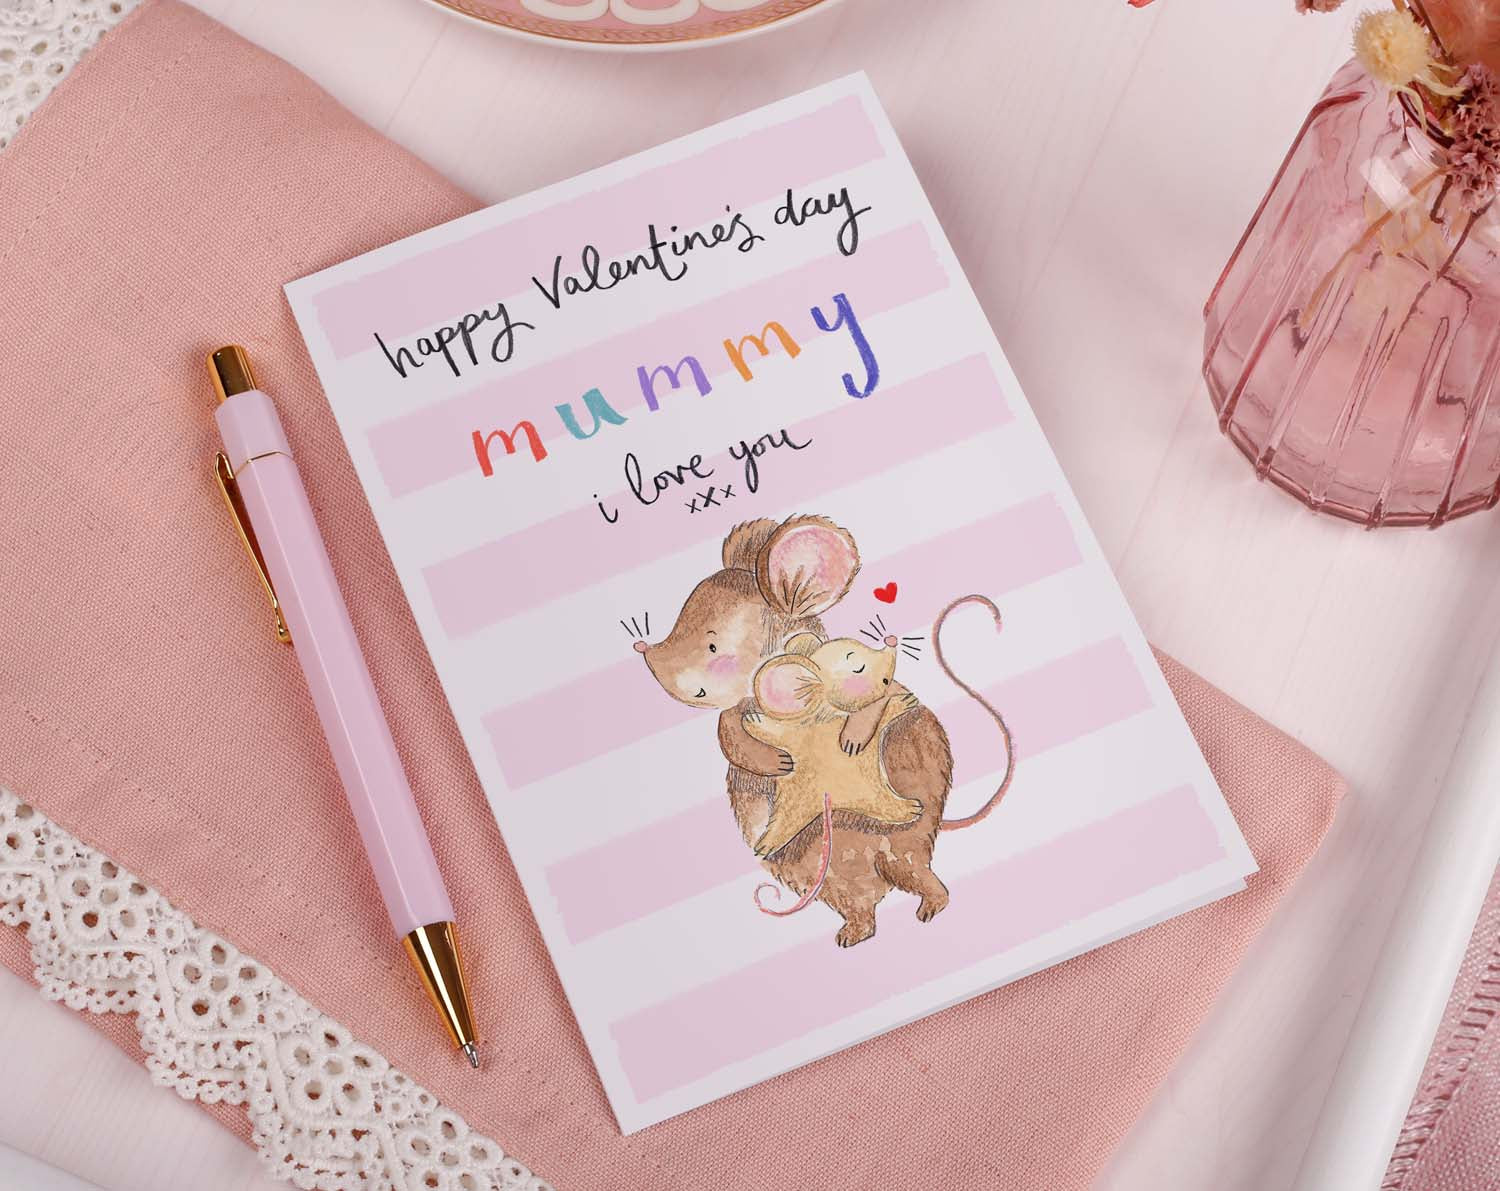 Sentimental Valentine Card For Mummy From The Baby